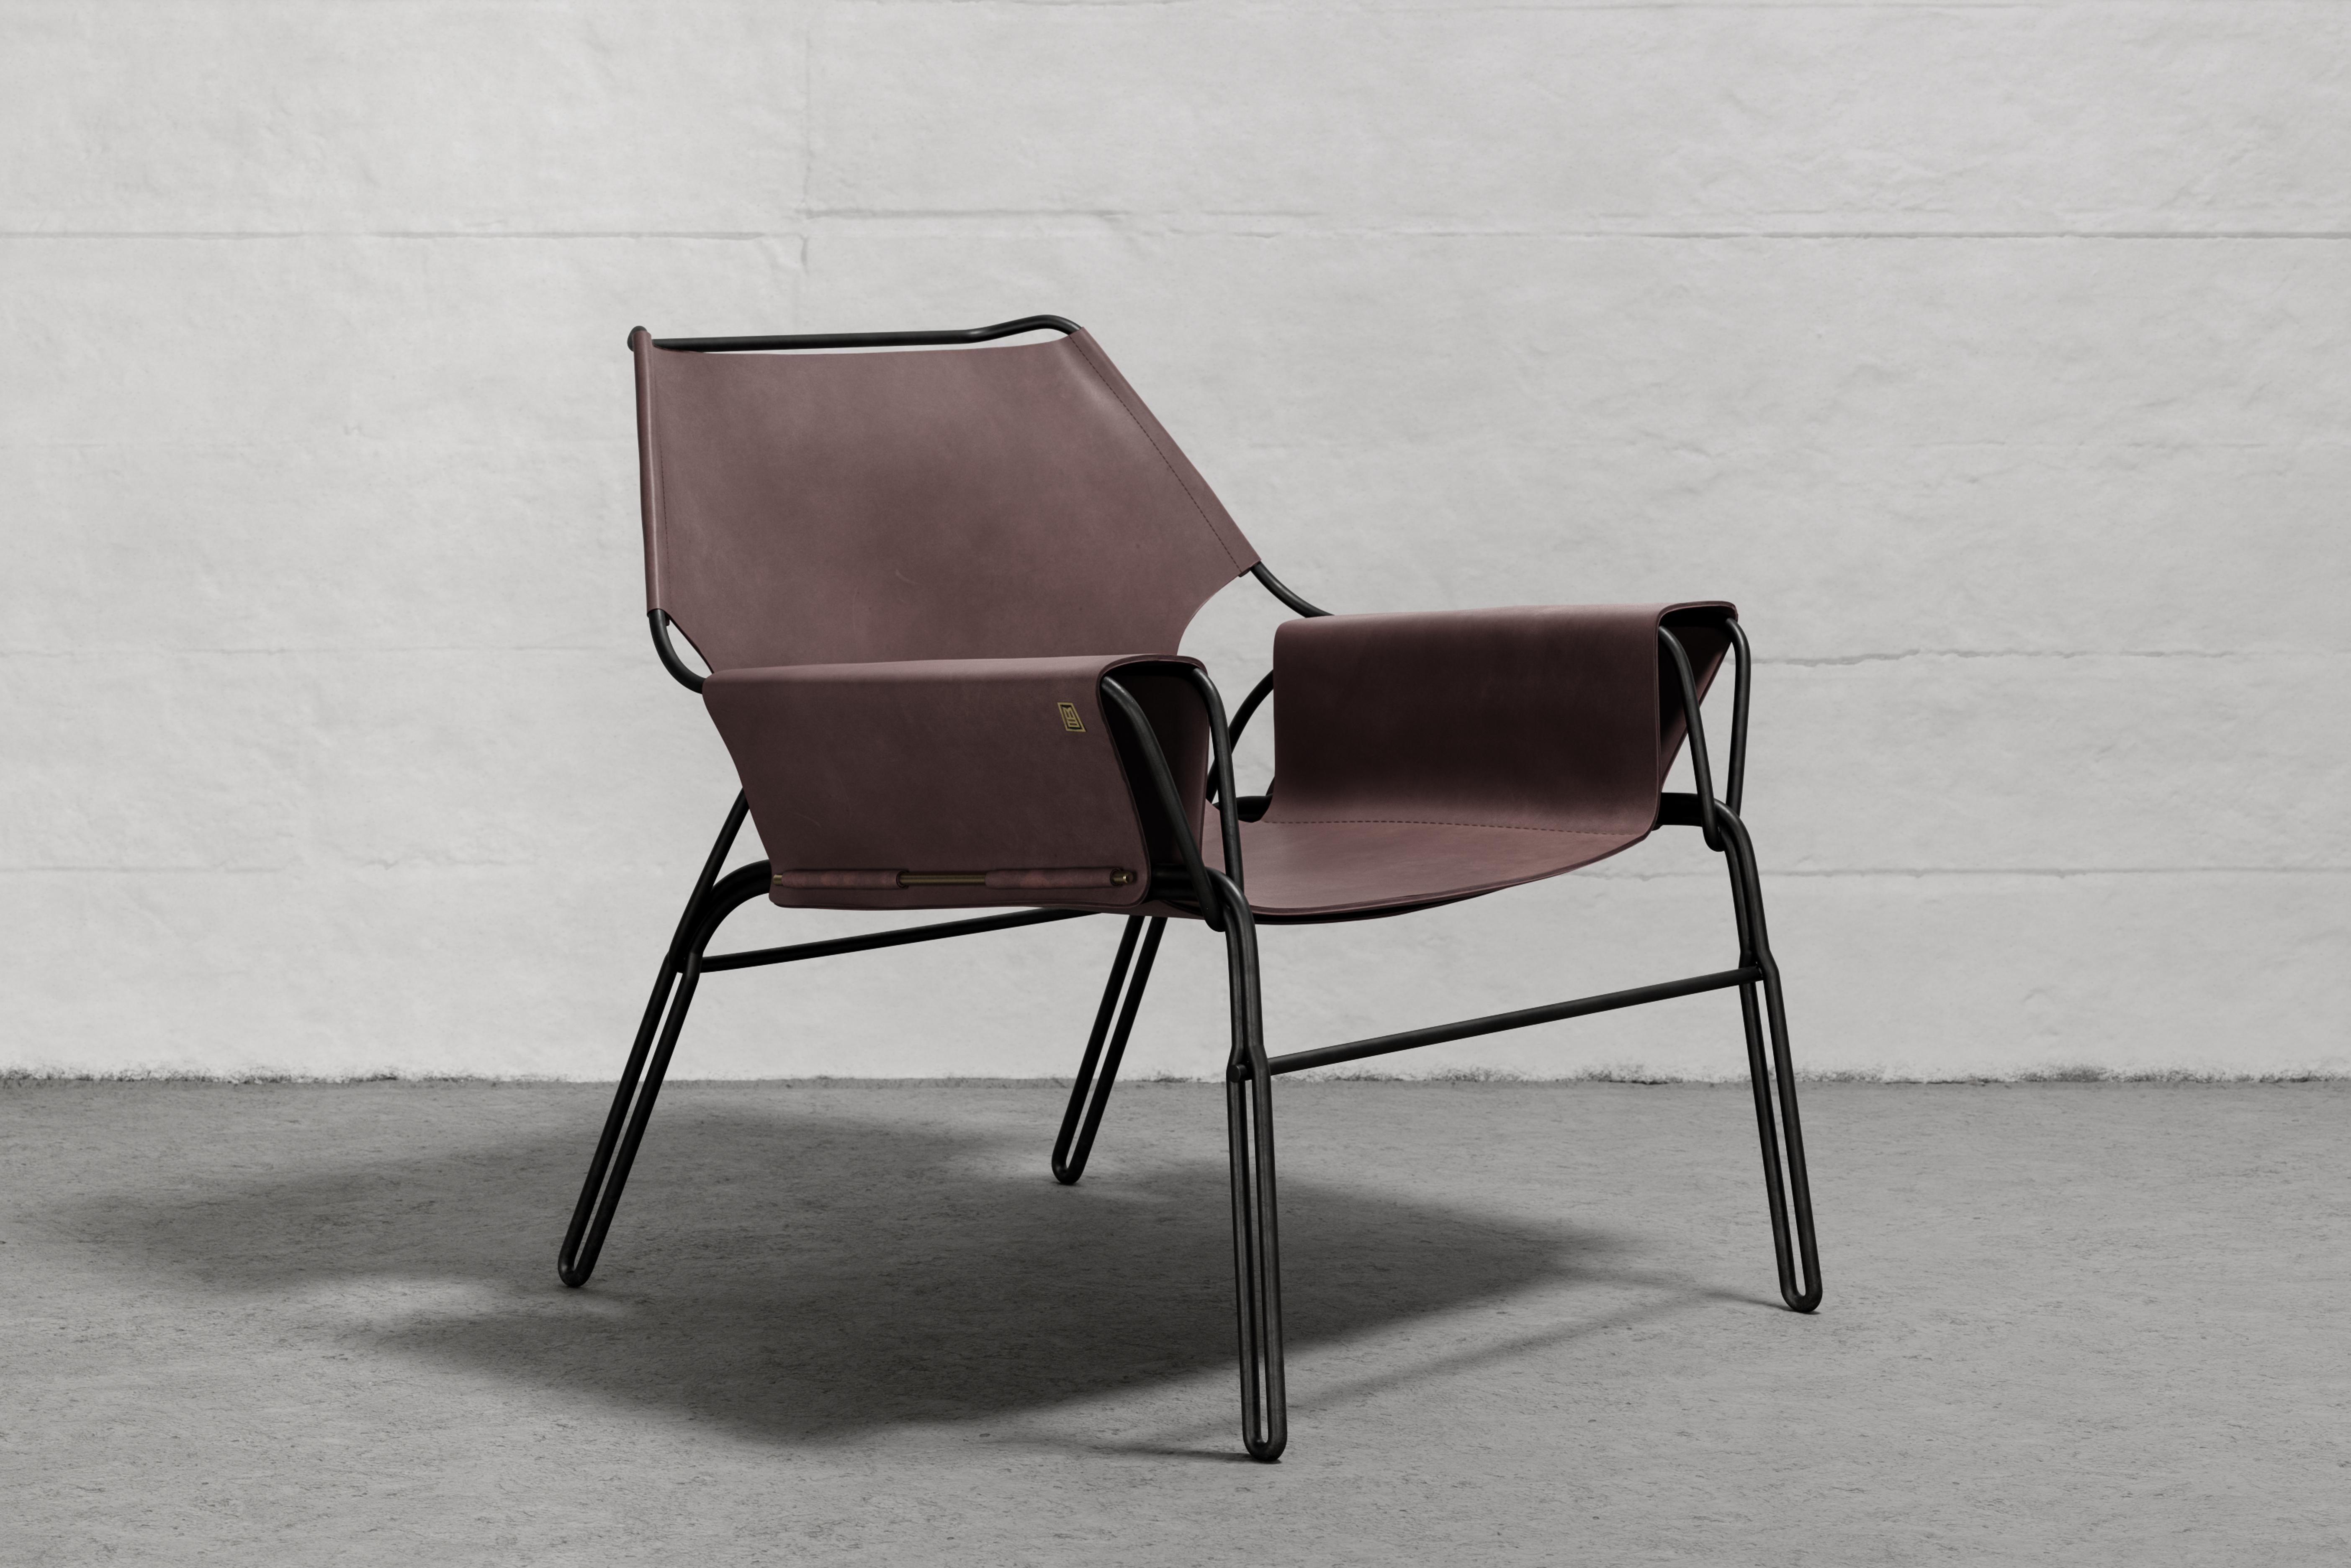 Lounge chair made of black finish steel rod structure, Ecuadorian cowhide leather seat, and lathed bronze or stainless steel hardware. Available in Olivo, Brown, and Cognac thick leather options.

The first Perfidia collection, composed of 4 pieces